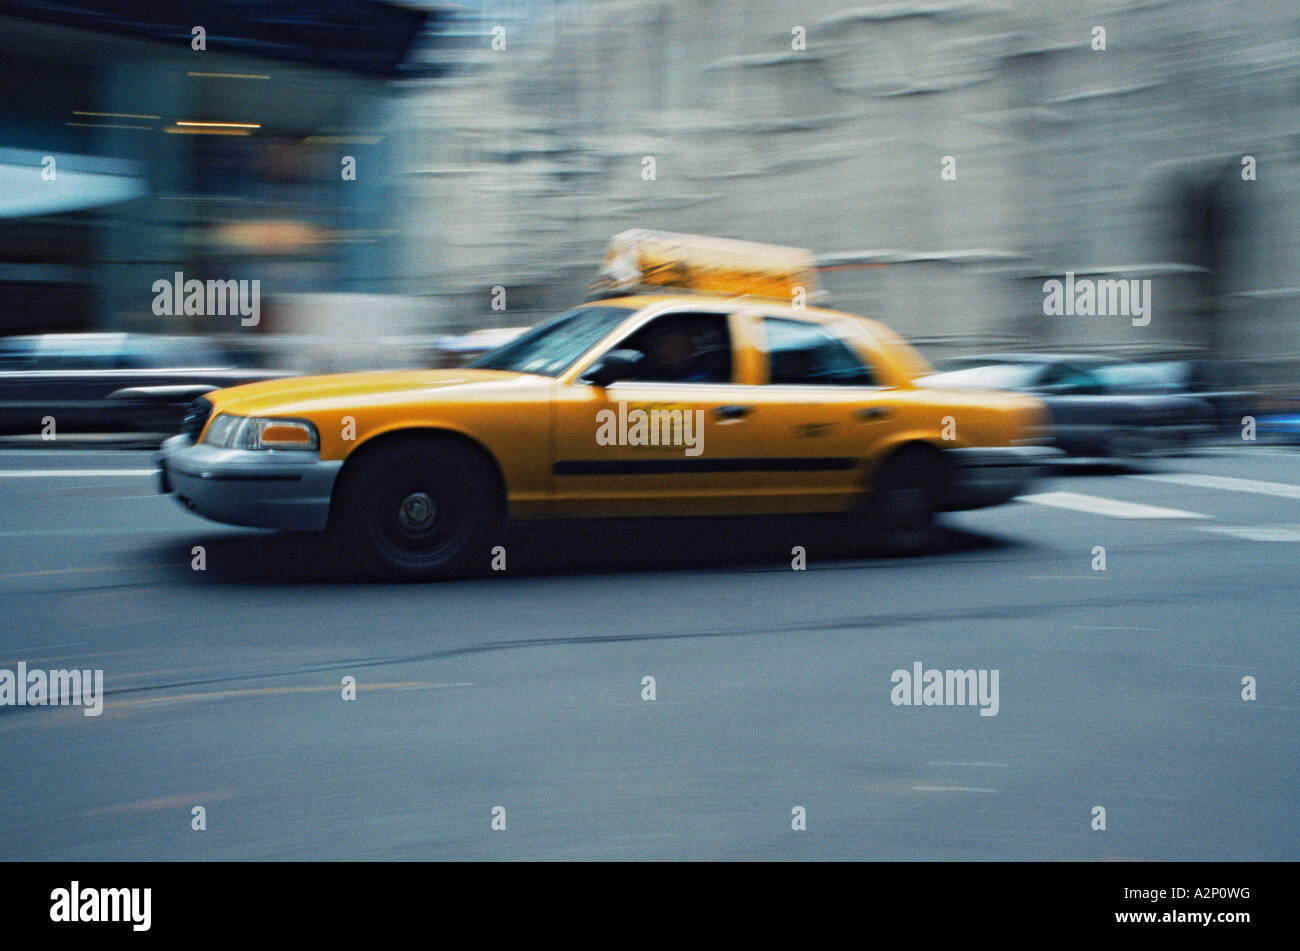 Yellow taxicab Stock Photo